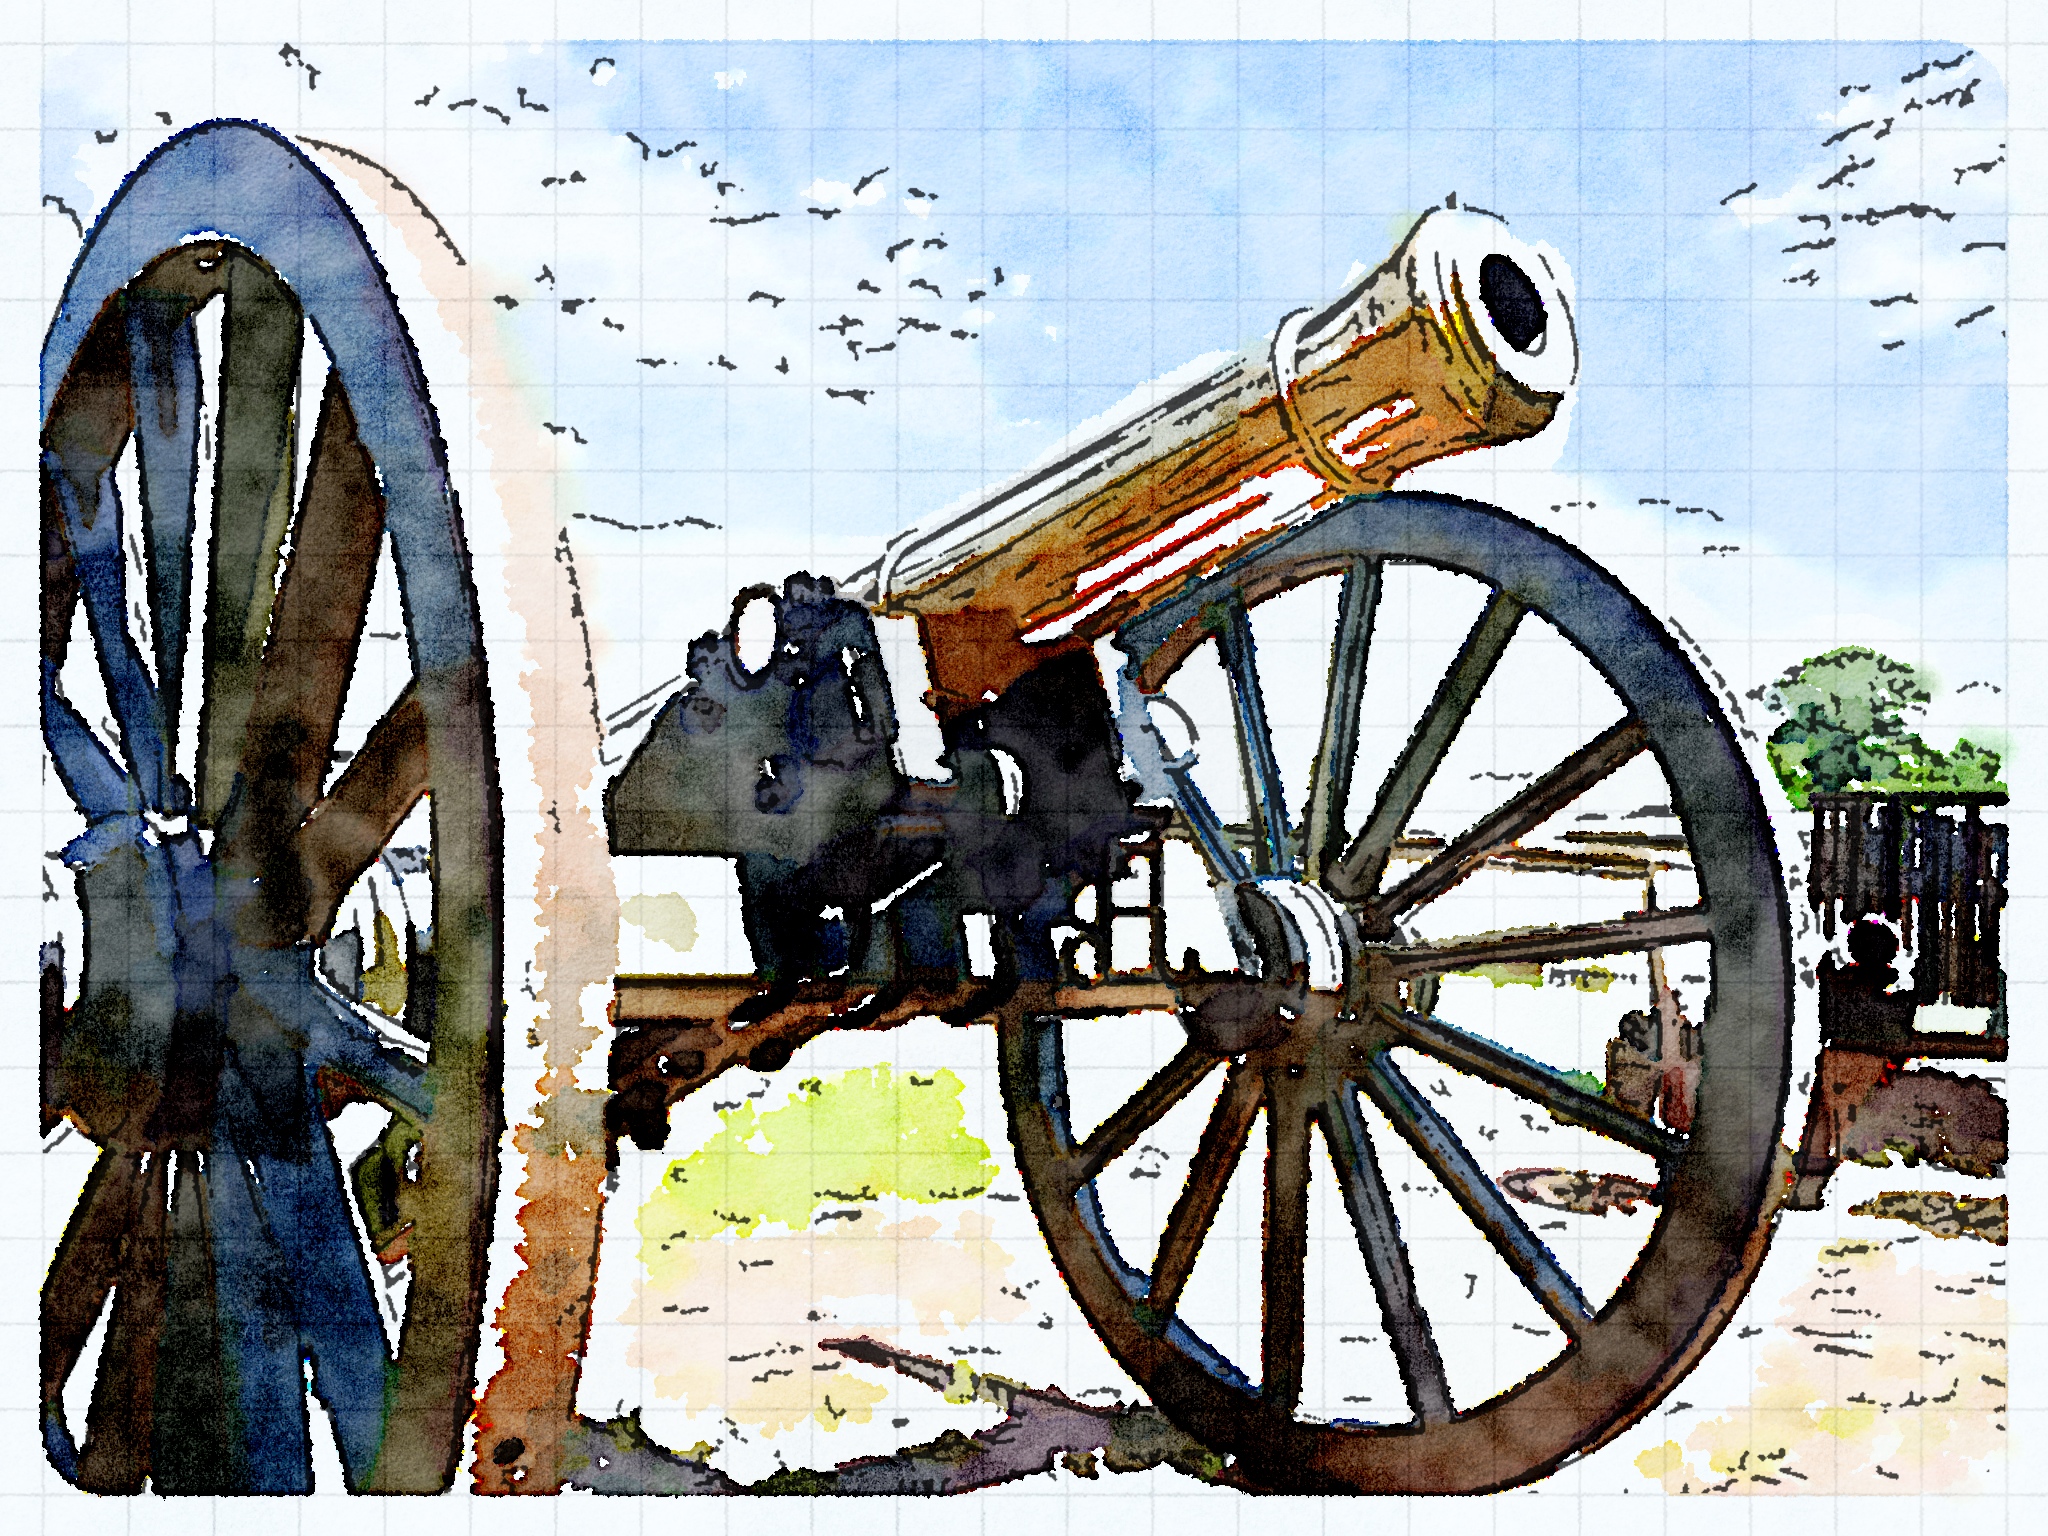 watercolor painting of a cannon with a side view in the background